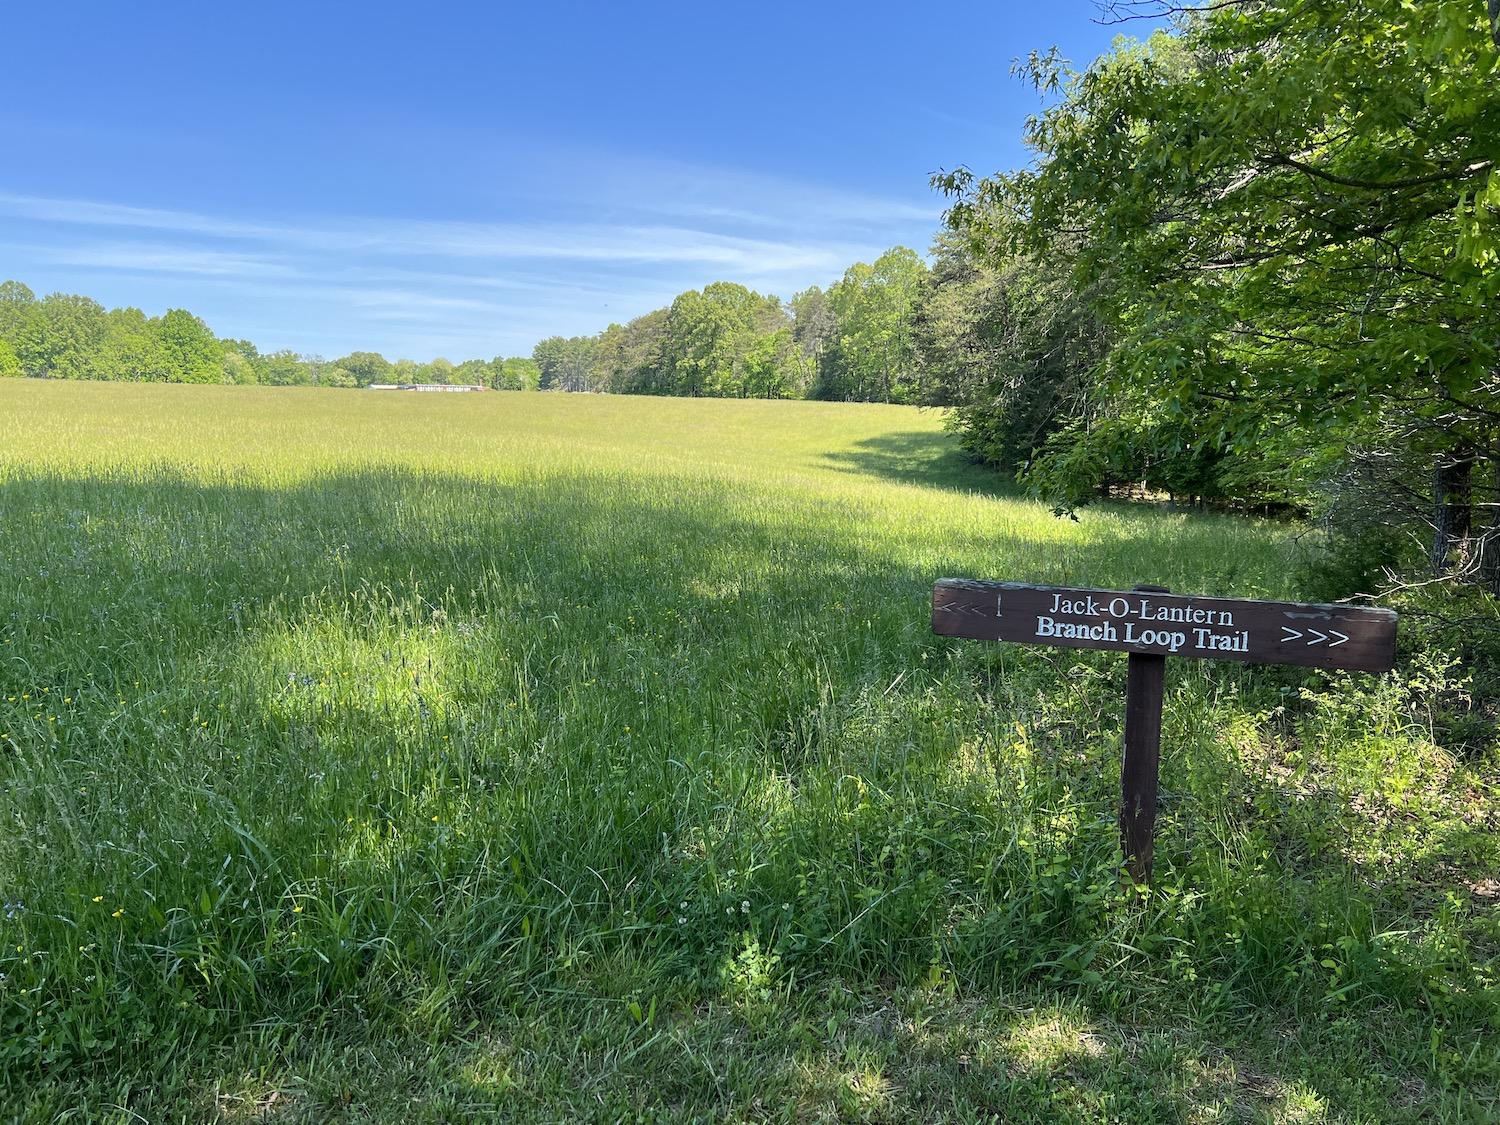 Booker T. Washington is popular with dog walkers and people who like to walk the Jack-O-Lantern Branch Trail through woods and this meadow.